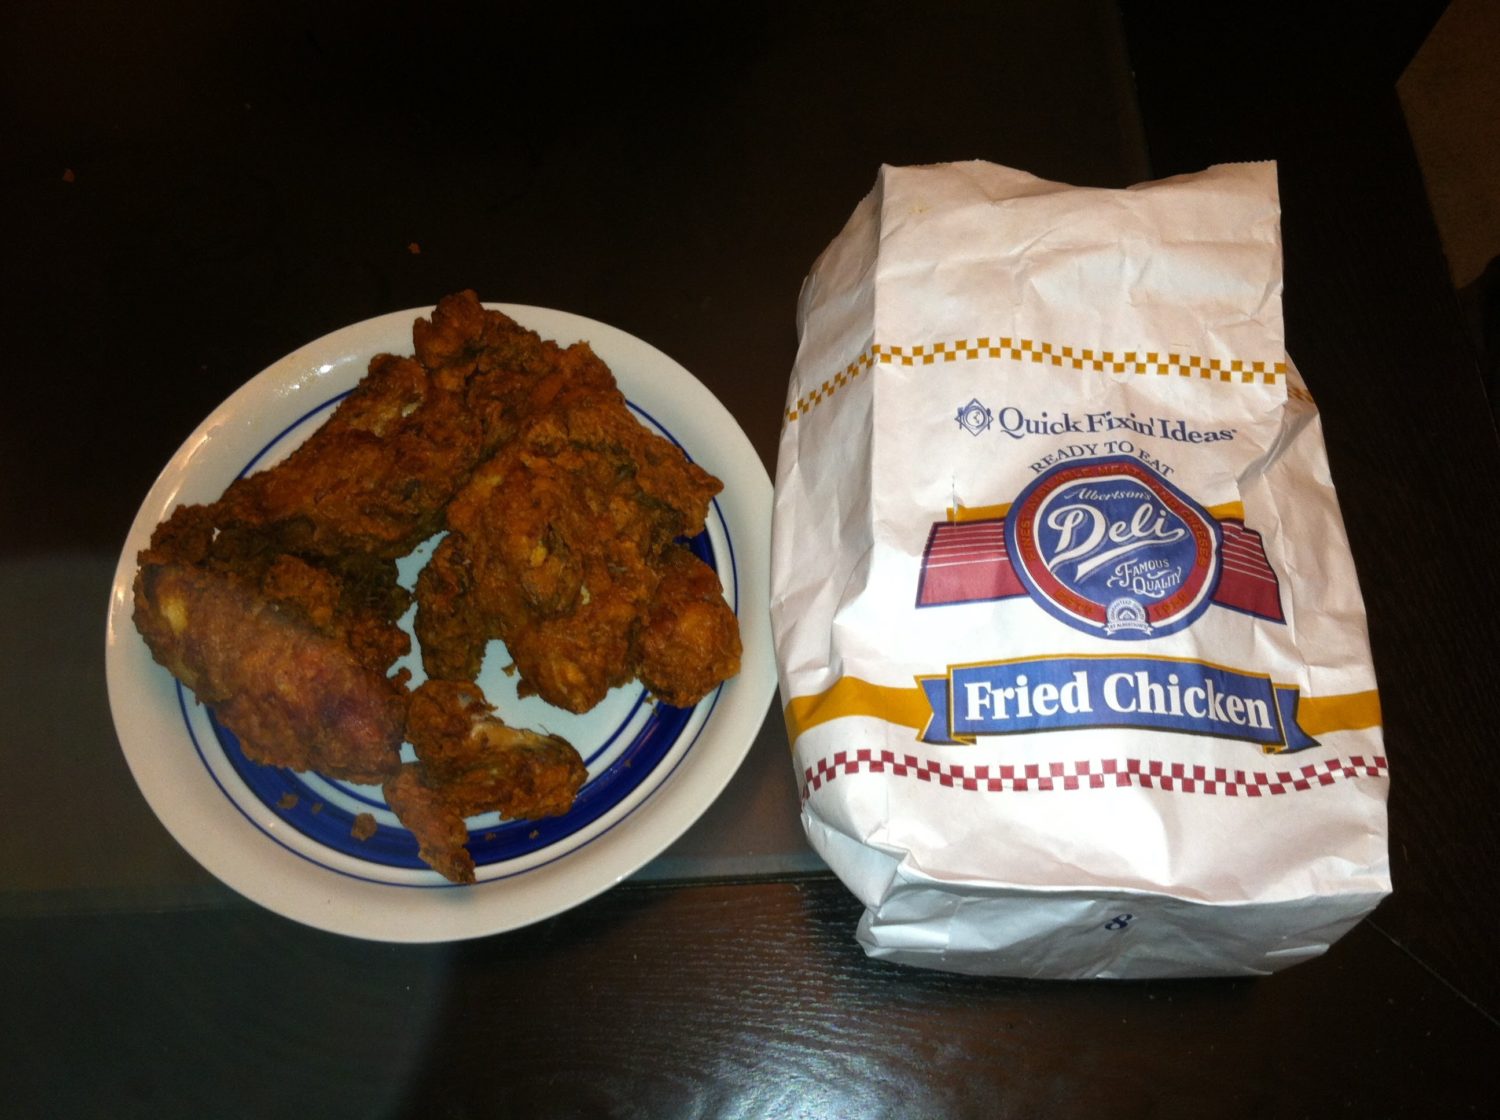 2. Fried Chicken Thigh from Publix.